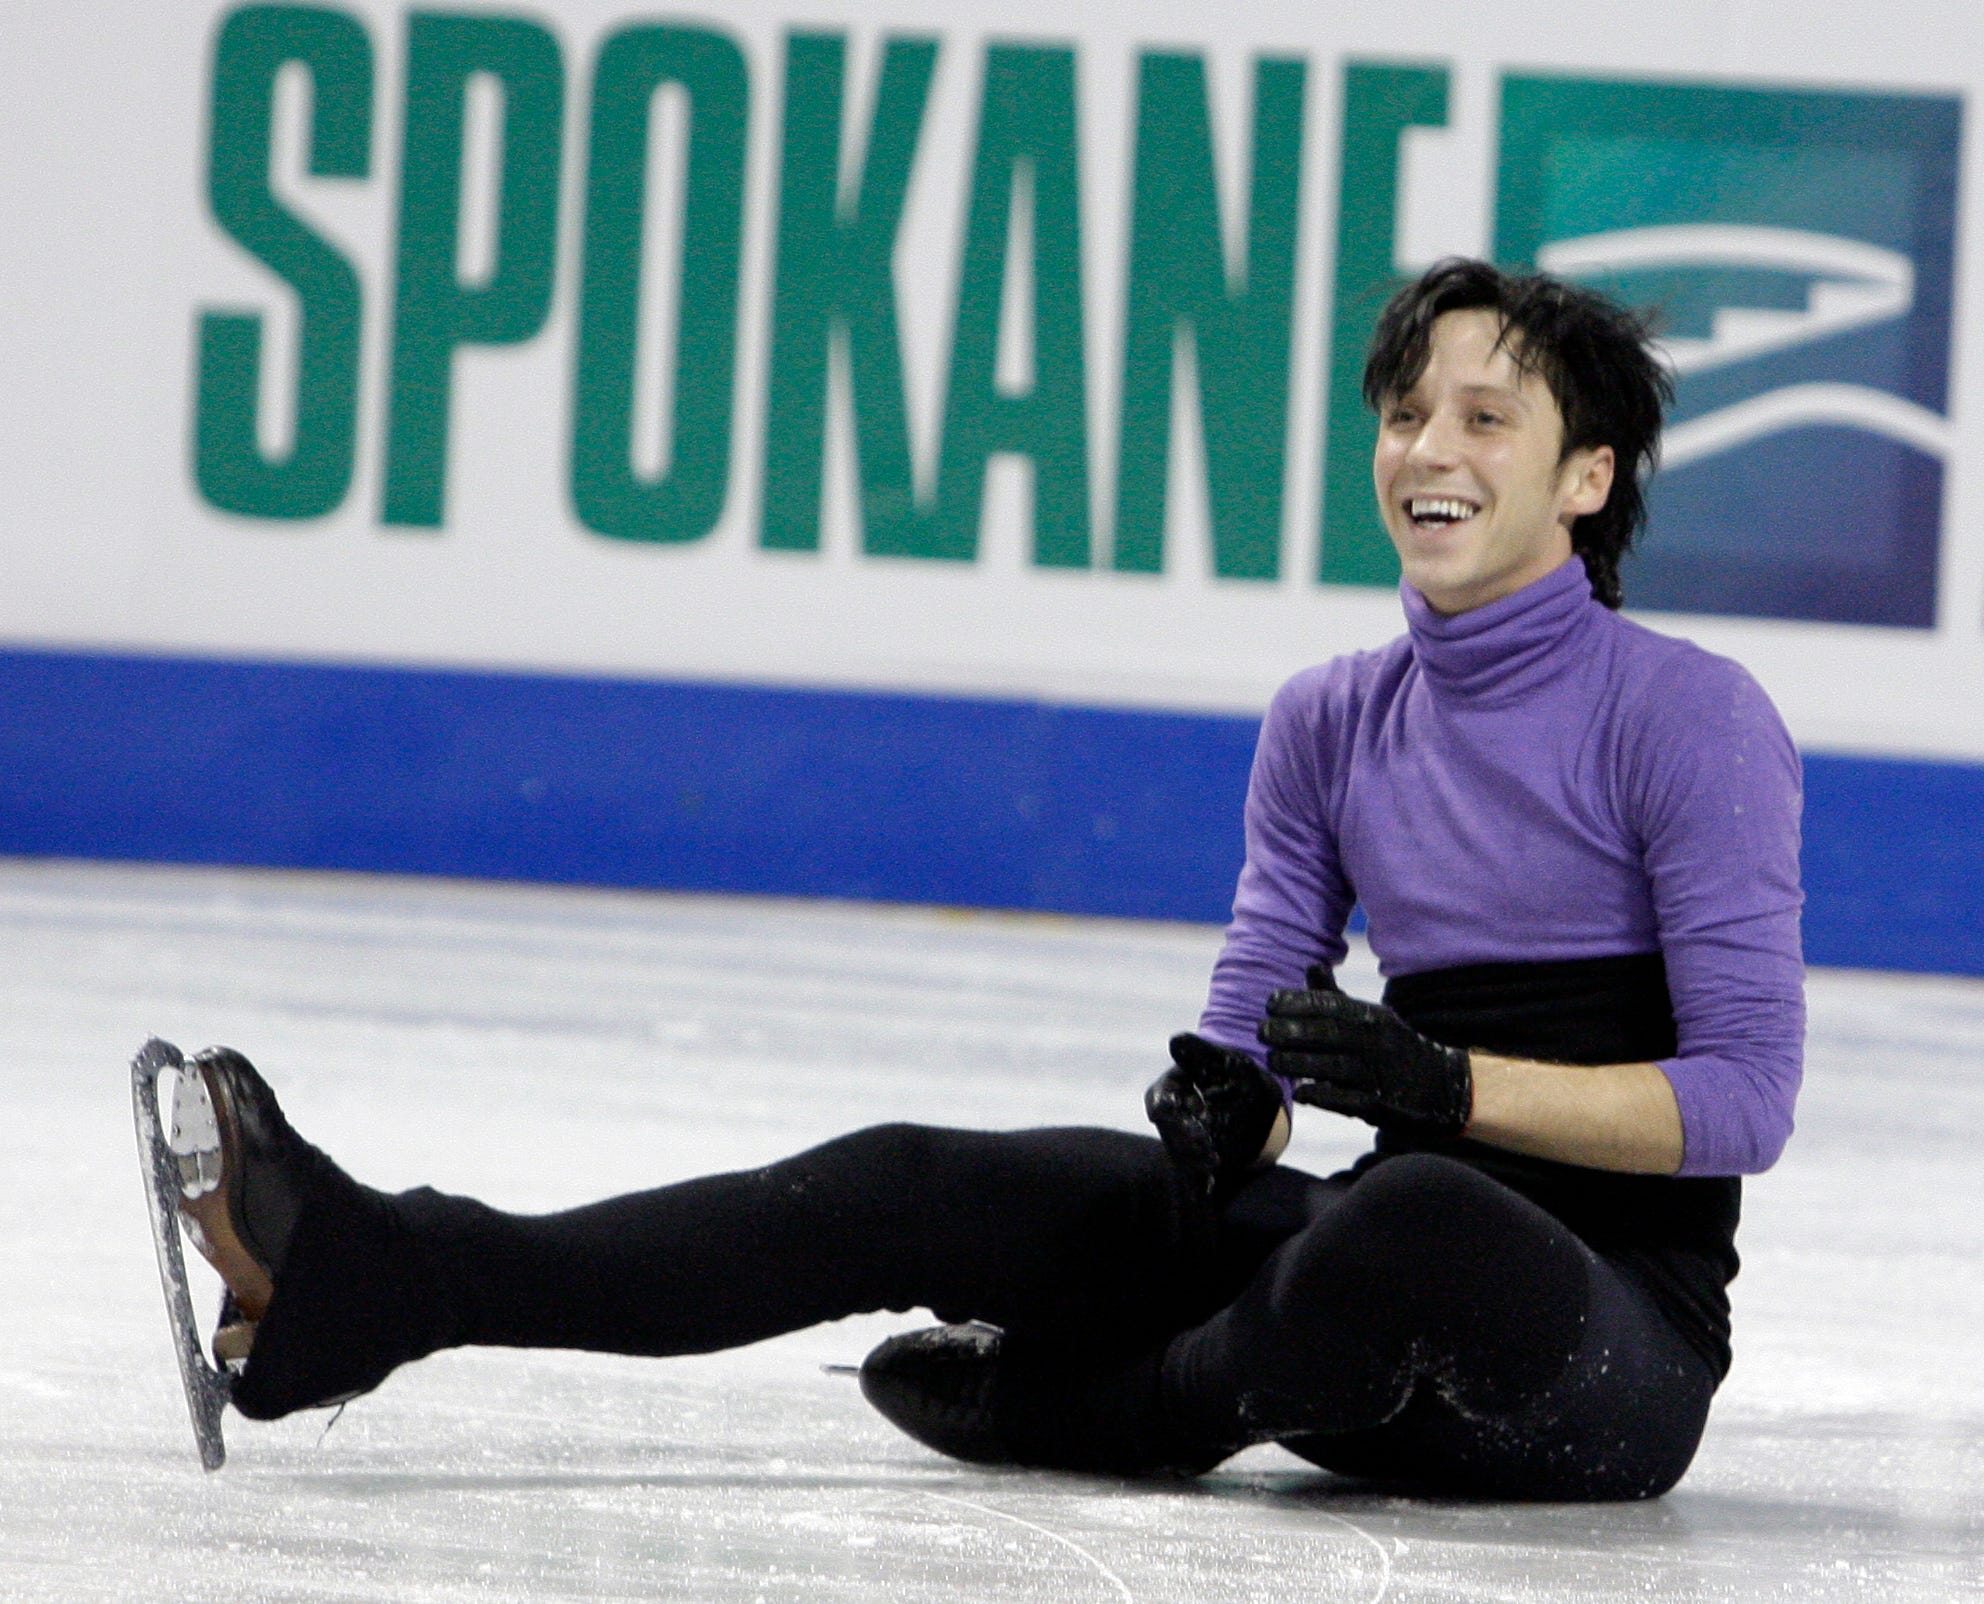 Johnny Weir smiles after he stumbled during a practice session in preparation for the U.S. Figure Skating Championships, Thursday, Jan. 14, 2010, in Spokane, Wash.